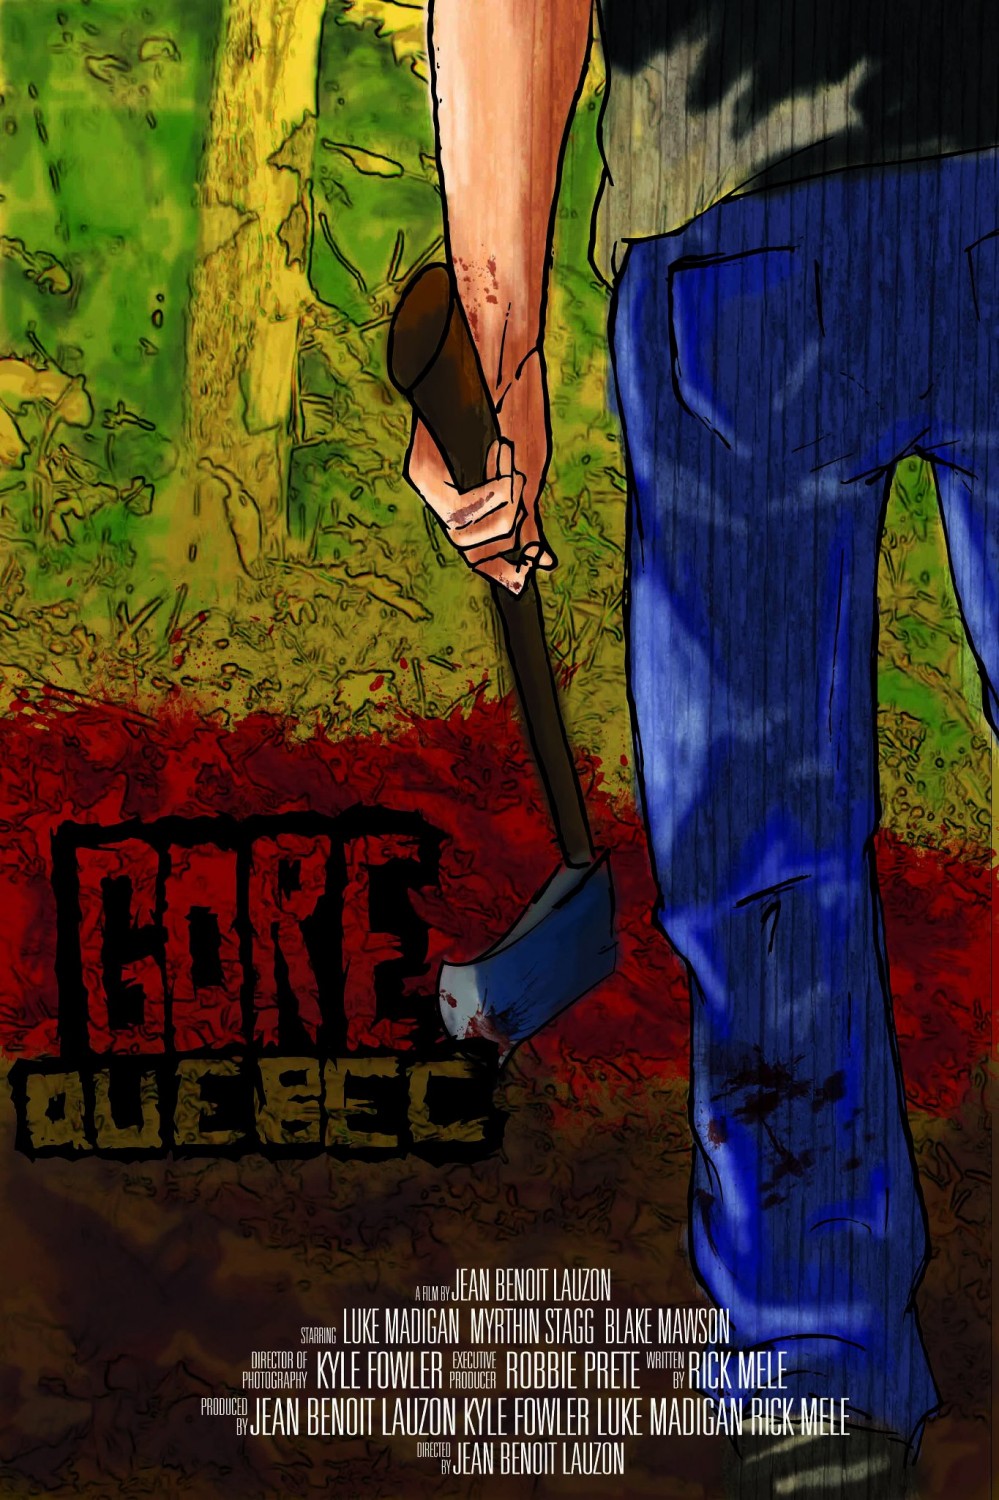 Extra Large Movie Poster Image for Gore, Quebec 